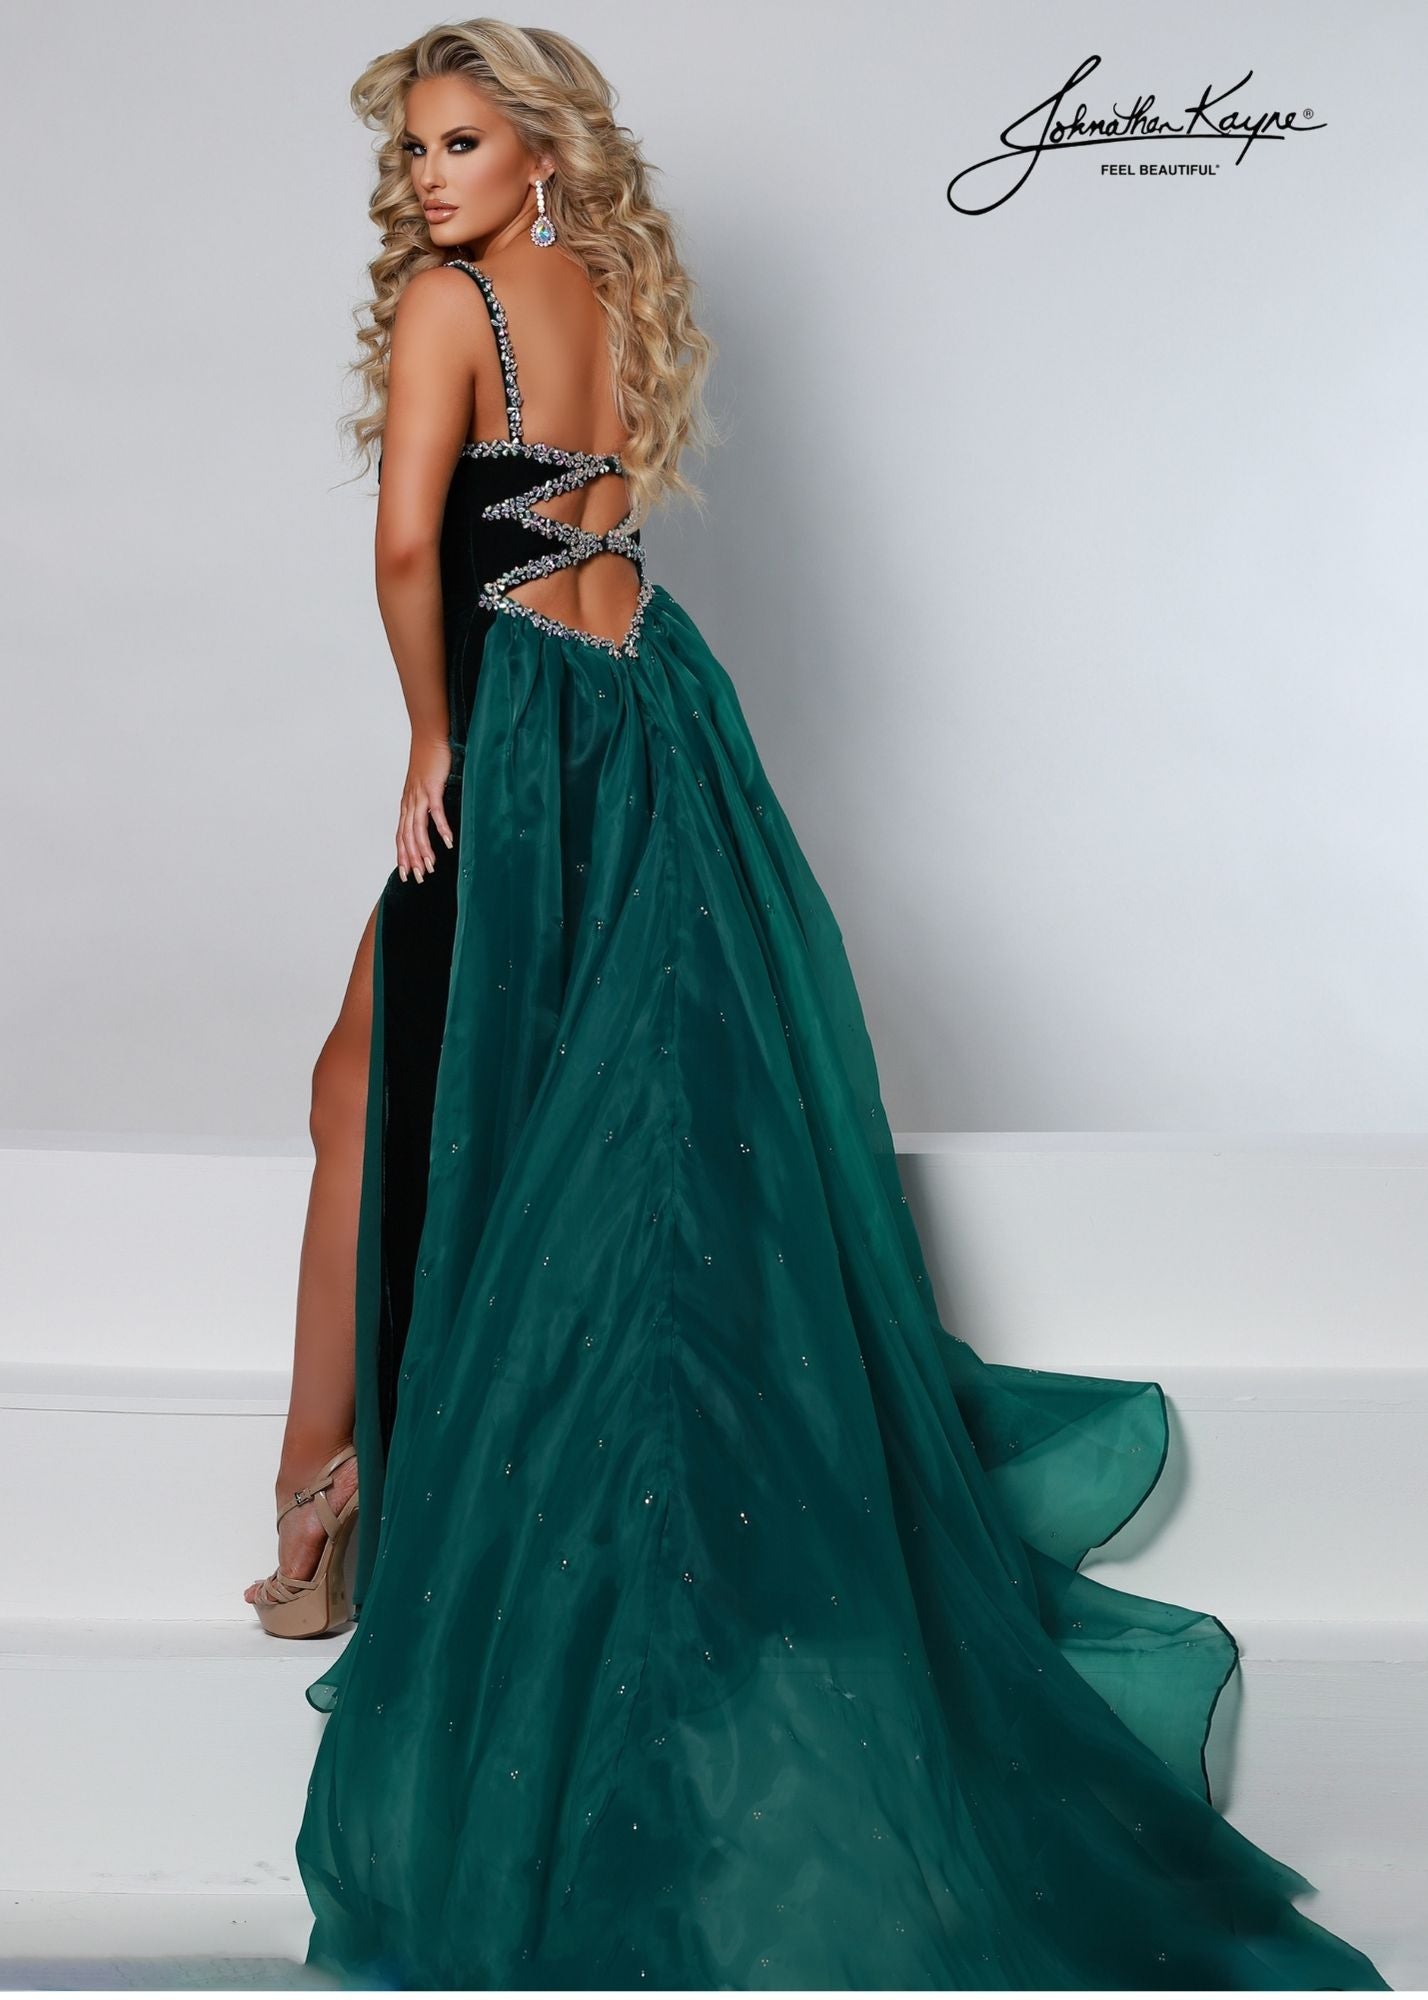 Johnathan Kayne 2549 Long V Neck Prom Dress Pageant Gown Crystal Overskirt Backless Showstopper! The plunging neckline is trimmed with hand beading as well as the cut out back bodice. The organza overskirt adds an elegant finish.  Color Emerald, Royal  Size 00, 0, 2, 4, 6, 8, 10, 12, 14, 16  Fabric Stretch Velvet, Mesh, Organza, Stretch Lining